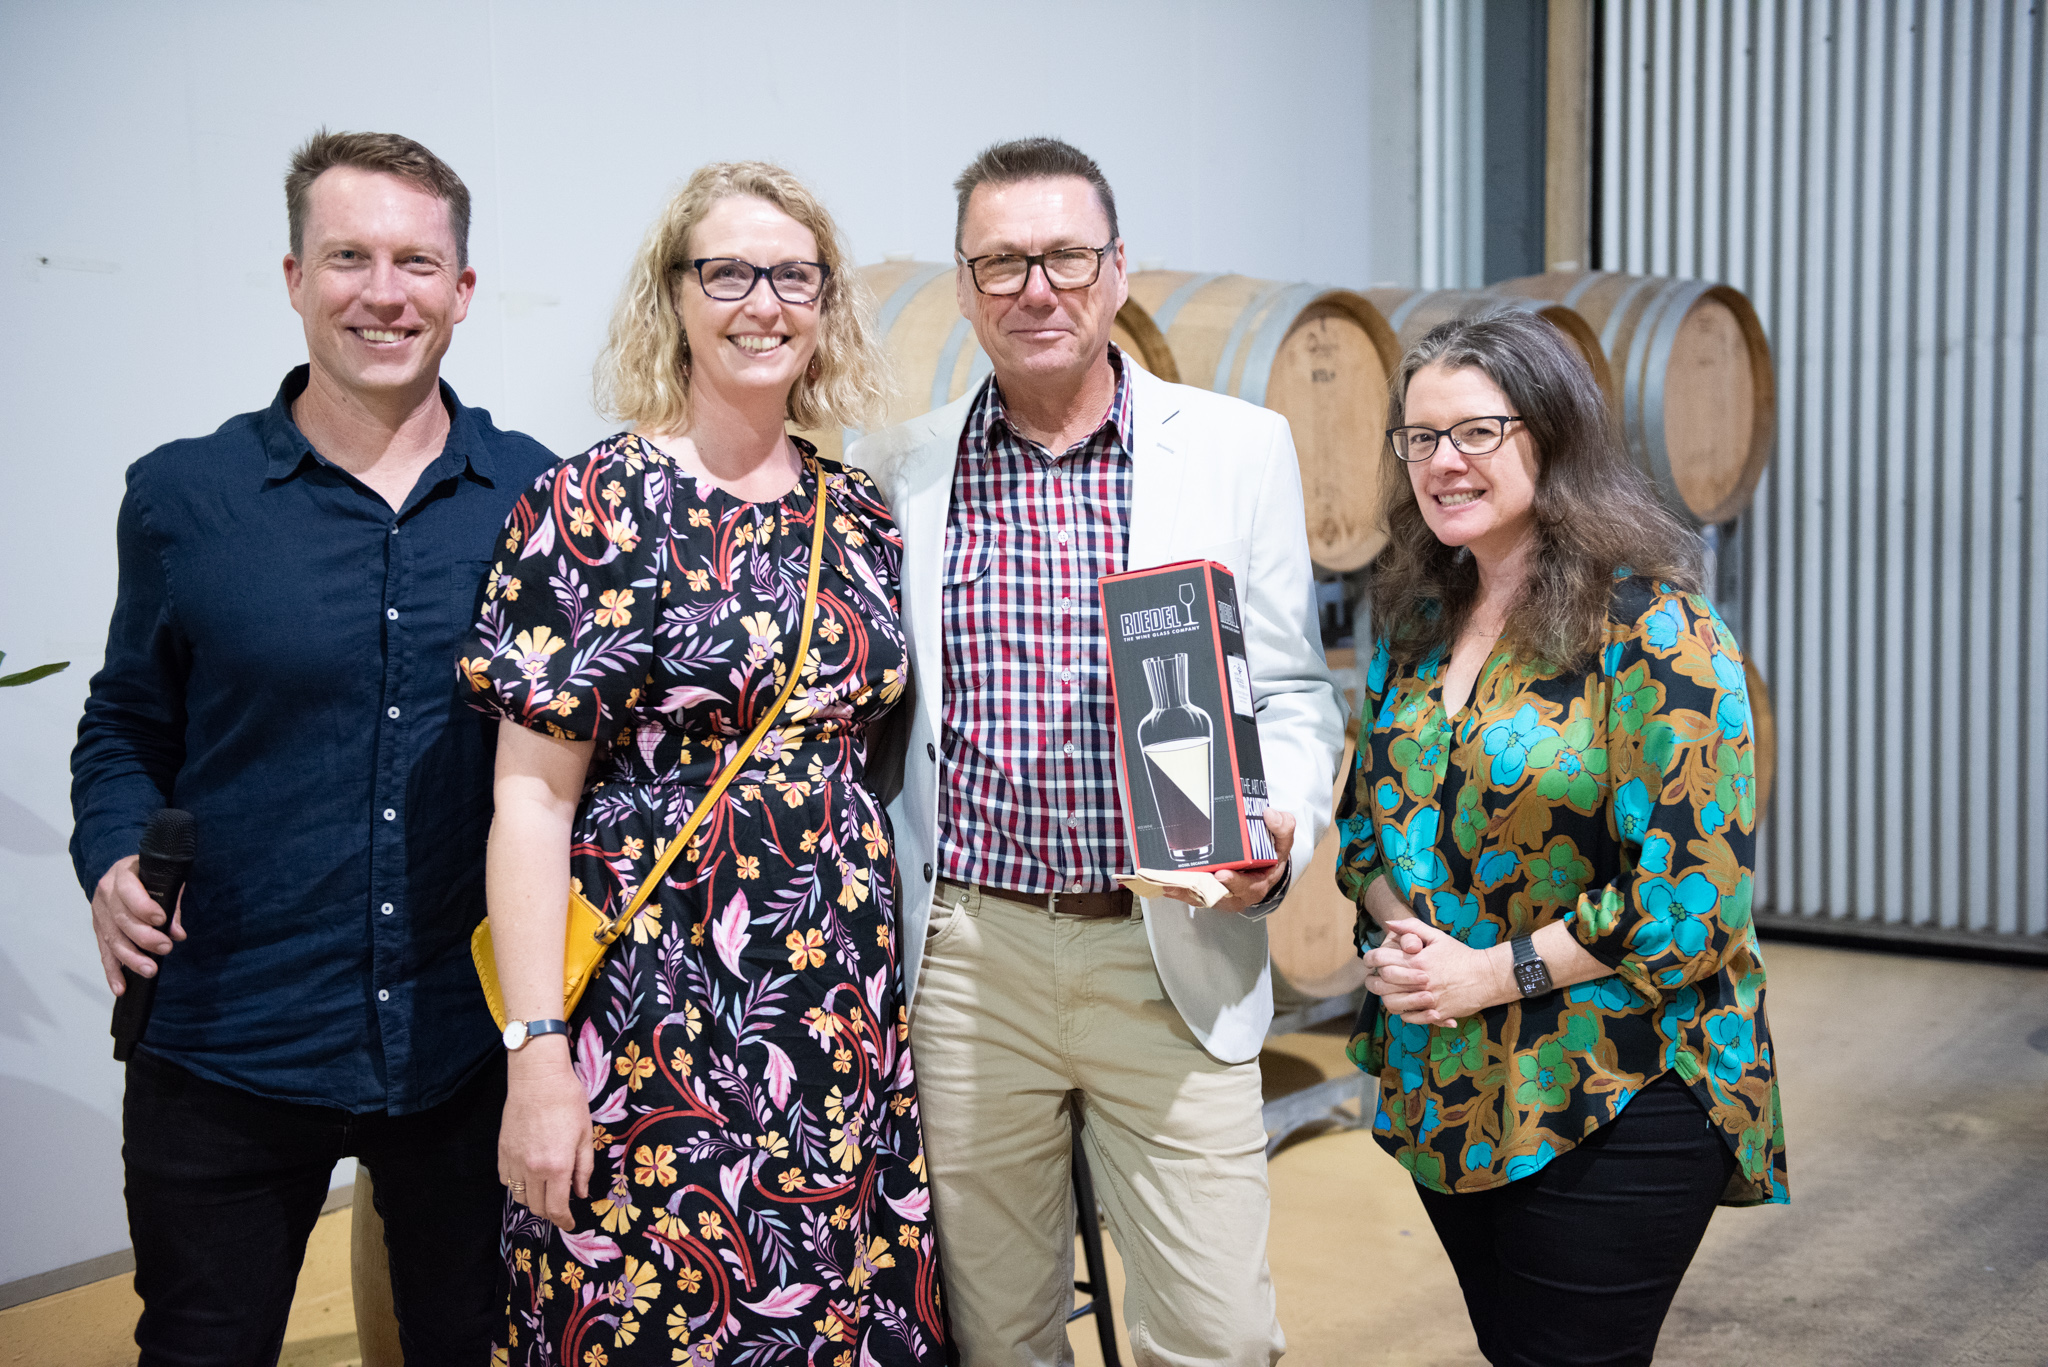 Corang Estate takes out Top Gong at Australian Highlands Wine Show